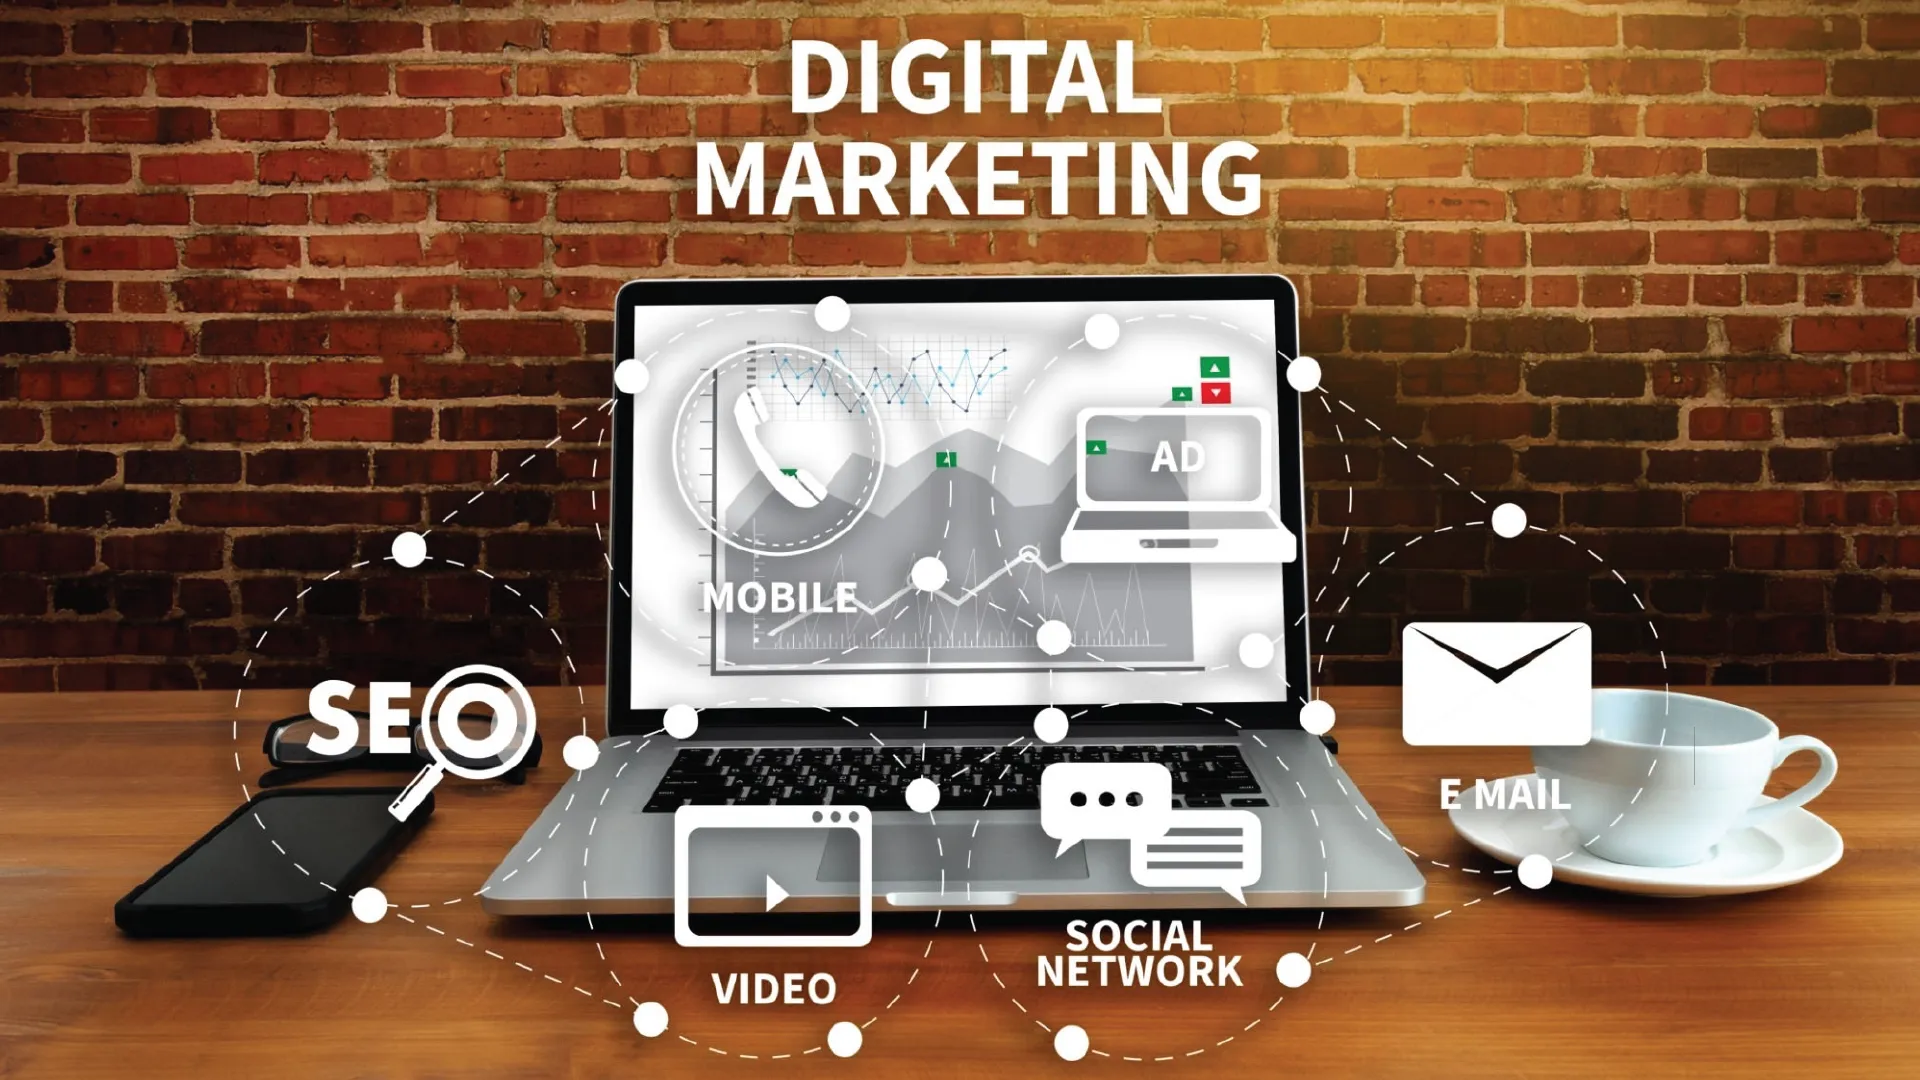 An illustration of the aspects of digital marketing